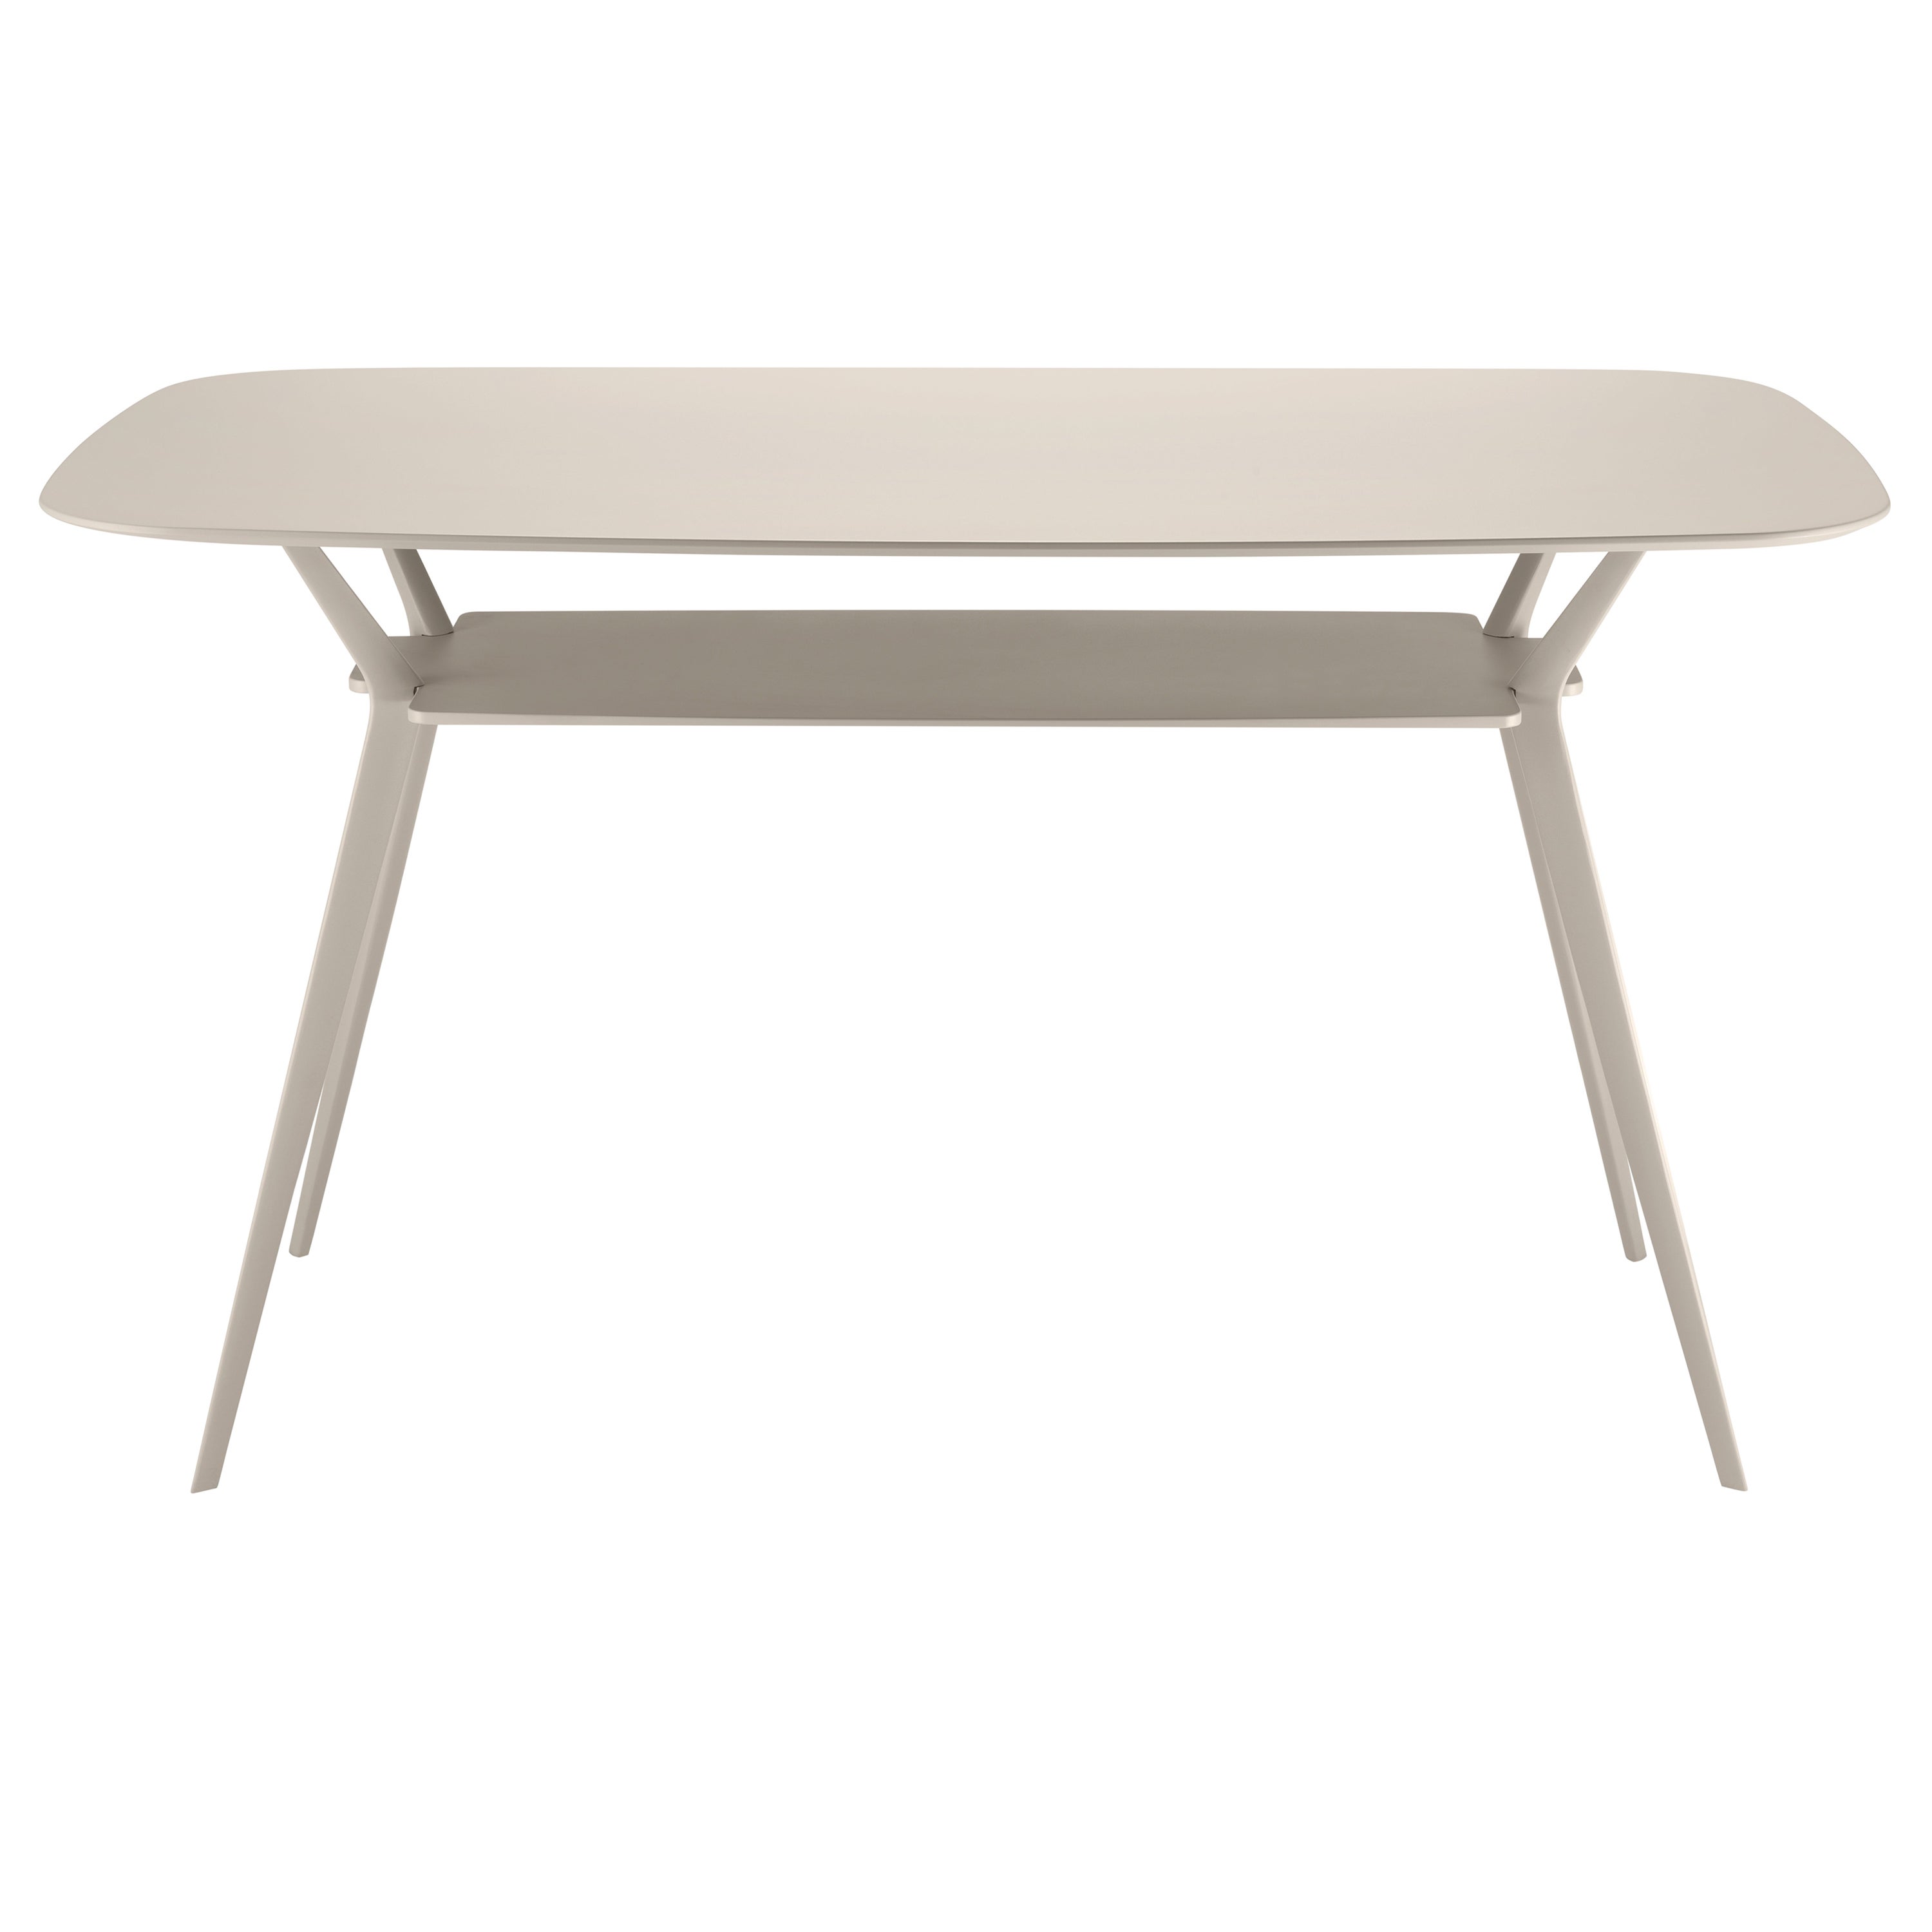 Alias Biplane 487 High Table in Sand MDF Top and Sand Polished Aluminium Frame For Sale